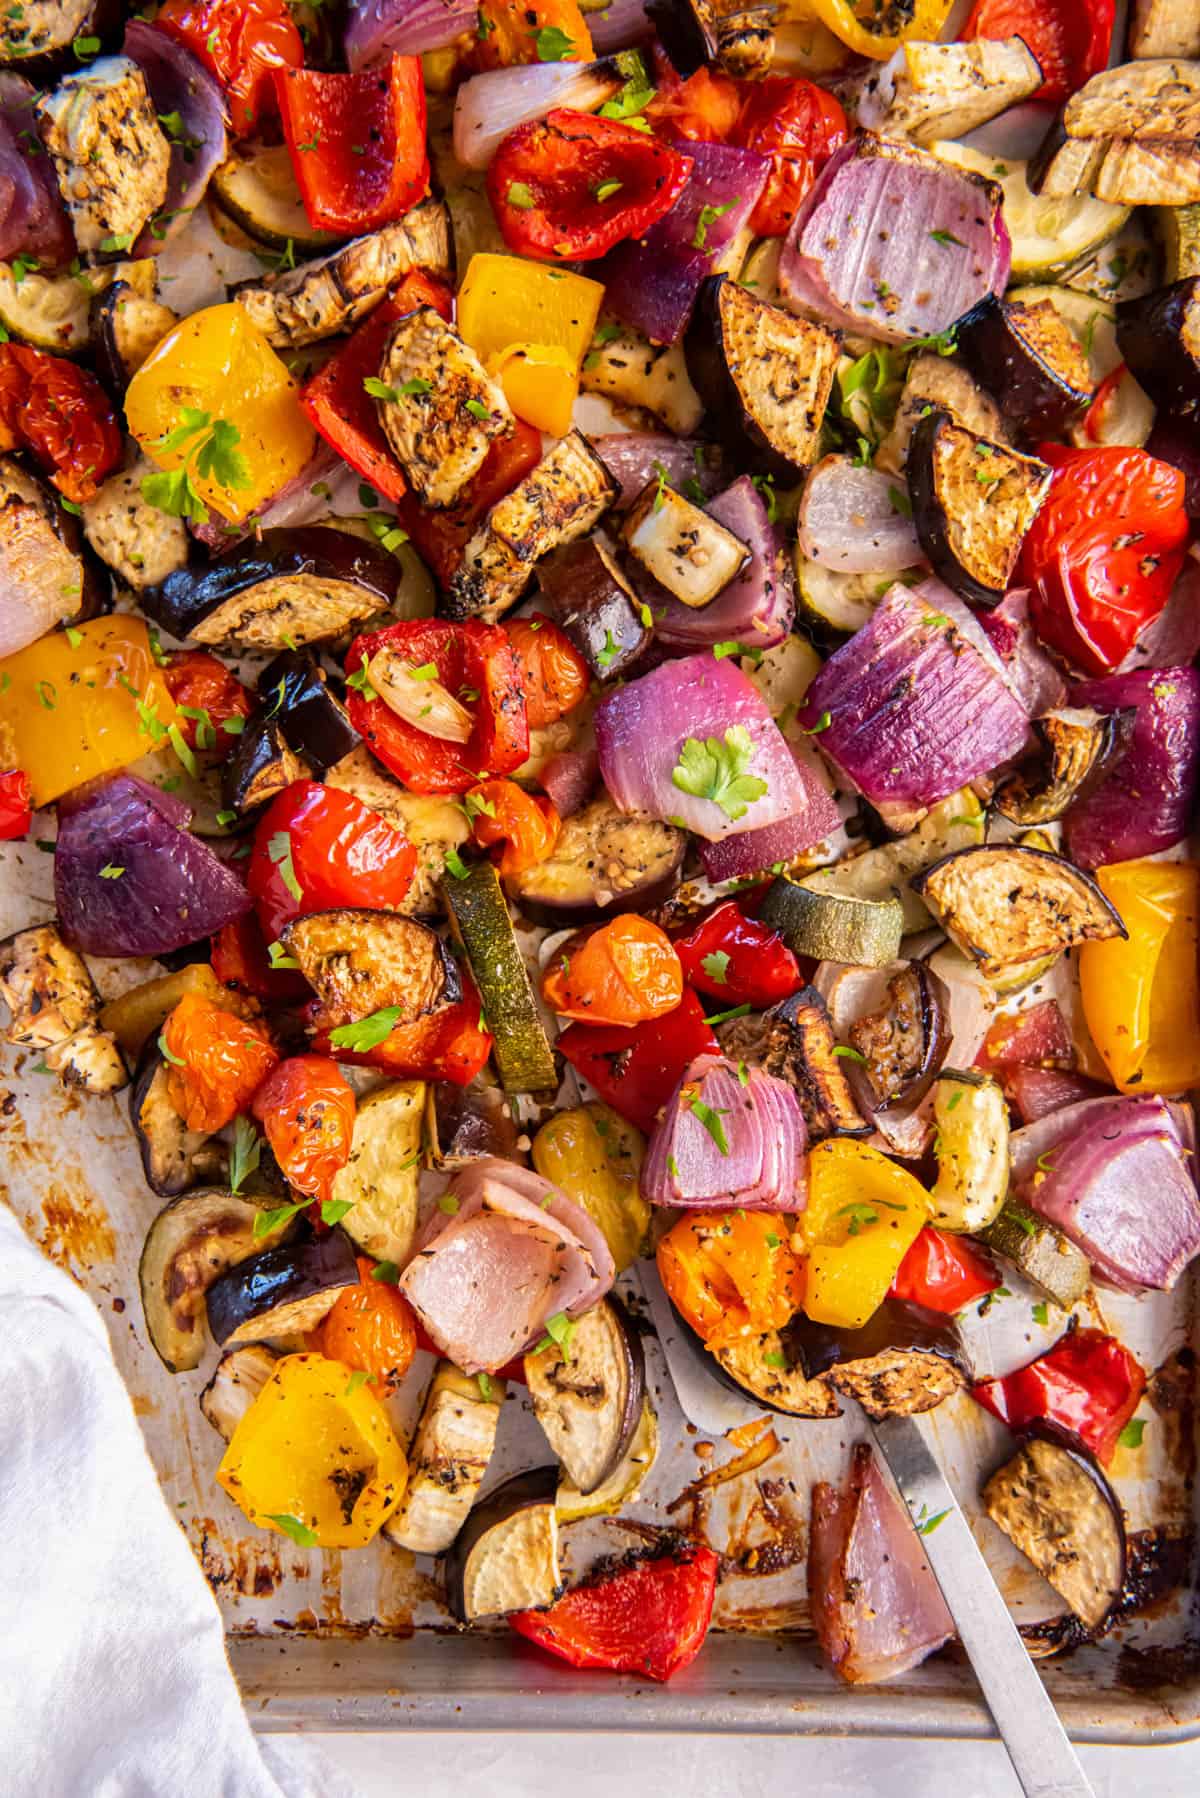 Mediterranean Roasted Vegetables on a sheet pan ready for serving. A spoon scoops up some of the vegetables.